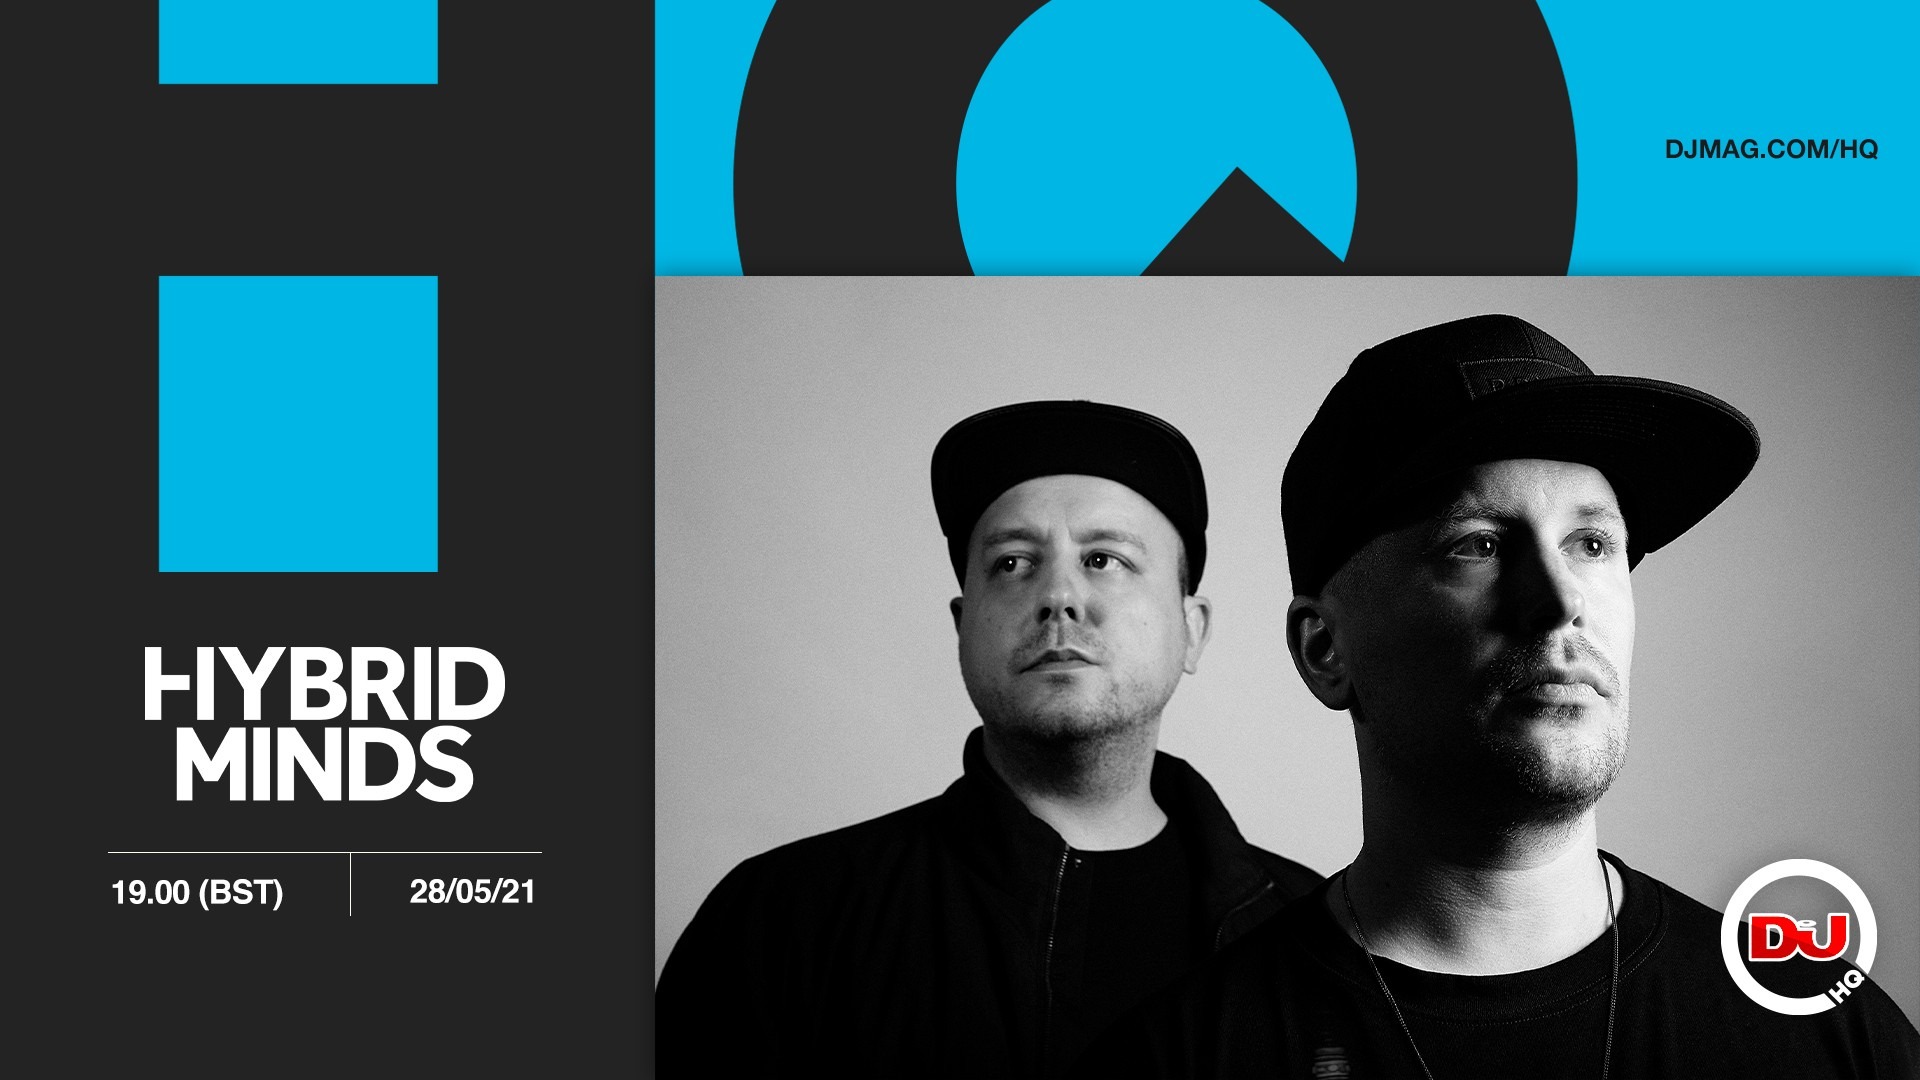 Watch Hybrid Minds from DJ Mag HQ, this Friday